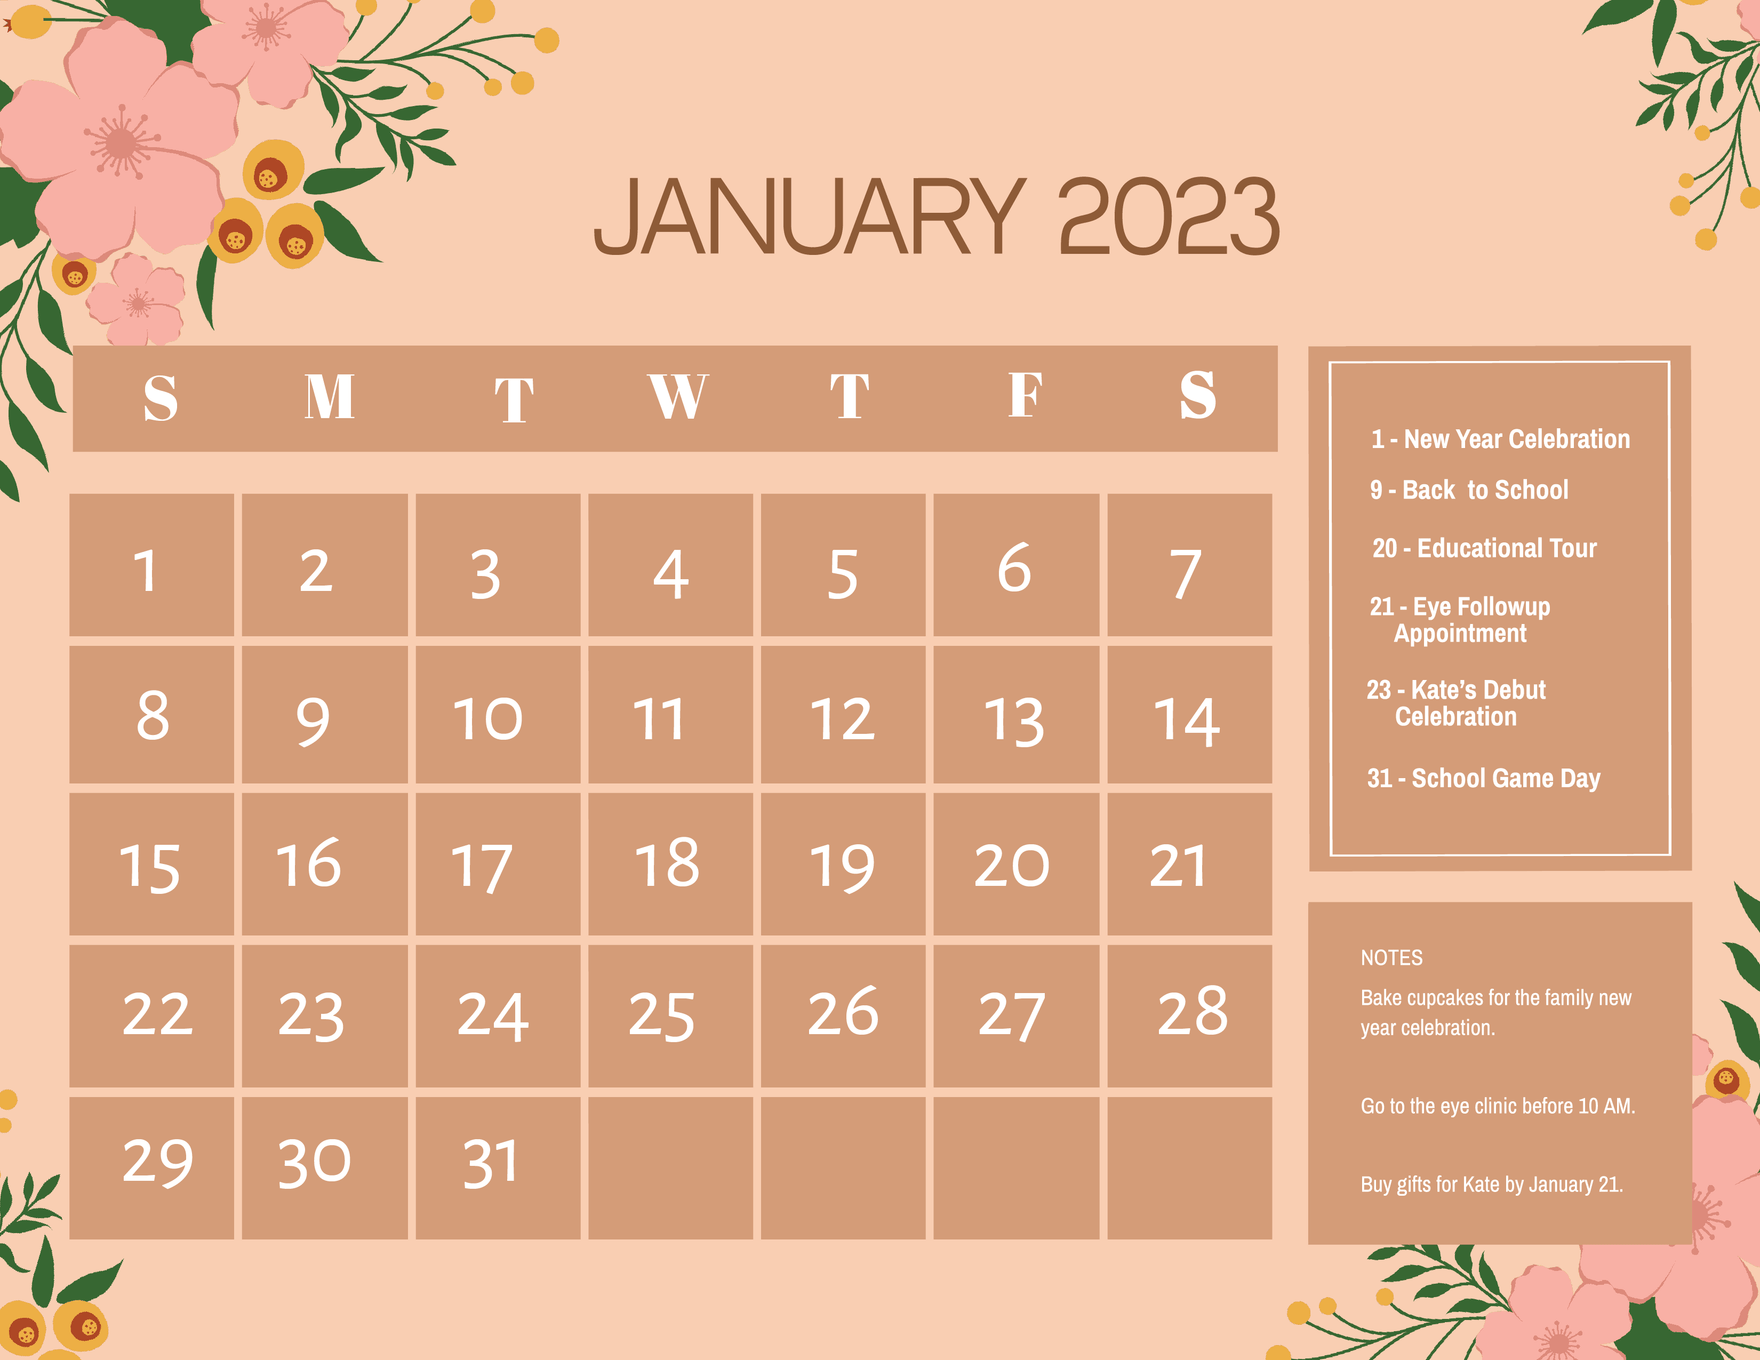 Colorful January 2023 Calendar - Download in Word, Illustrator, PSD